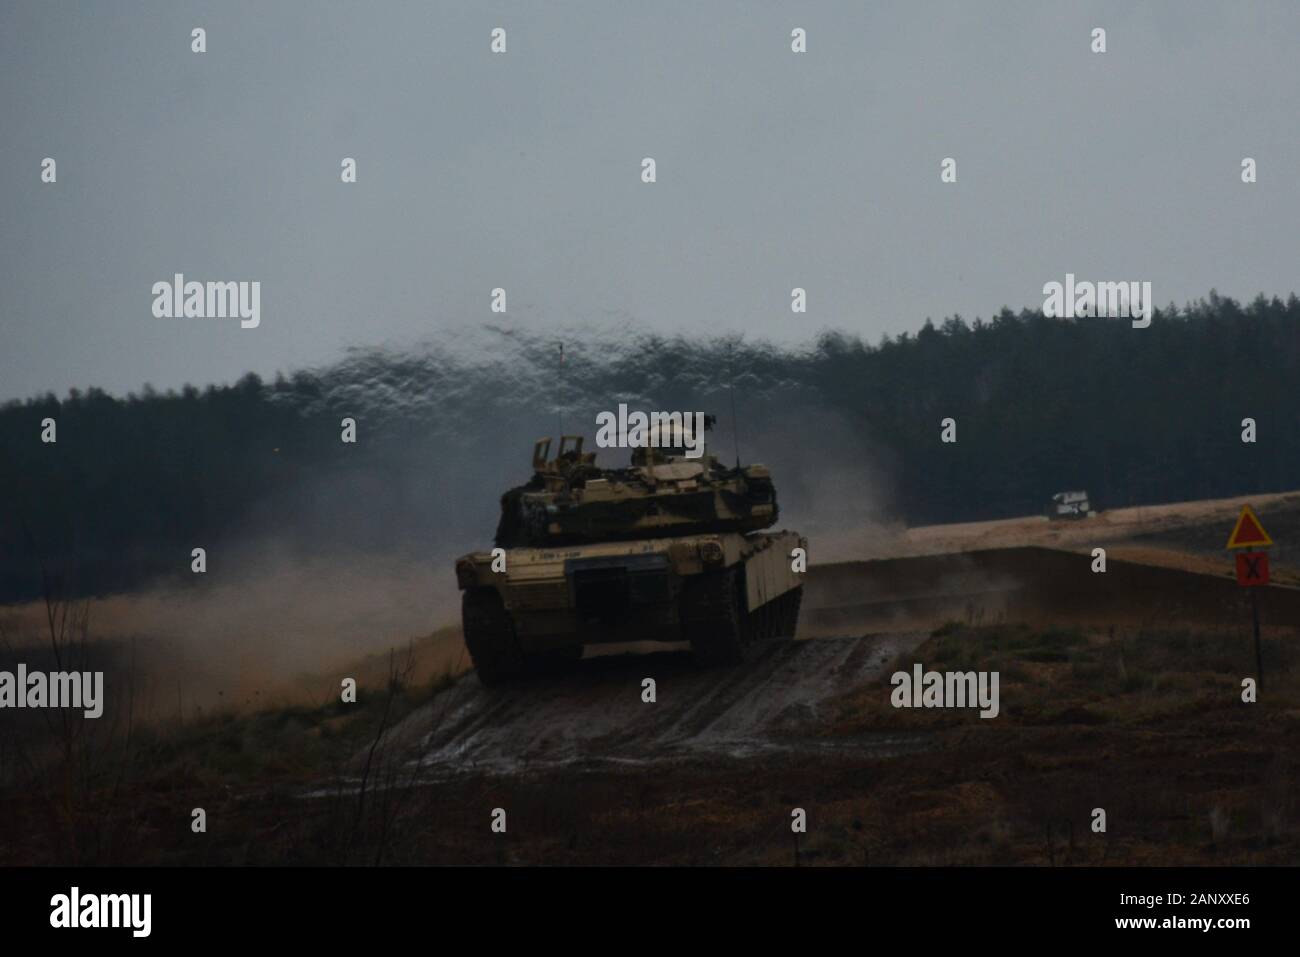 An M1A2 Abrams tank fires toward the enemy contact point as part of live fire range training on January 14, 2020, in Pabradé, Lithuania. Soldiers from the 1st Battalion, 9th Cavalry Regiment, 2nd Armored Brigade Combat Team, 1st Cavalry Division ‘Headhunters’, participated in the live fire exercise in order to hone their skills at reacting to enemy fire.   (U.S. Army National Guard Photo by Staff Sgt. Scott D. Longstreet) Stock Photo